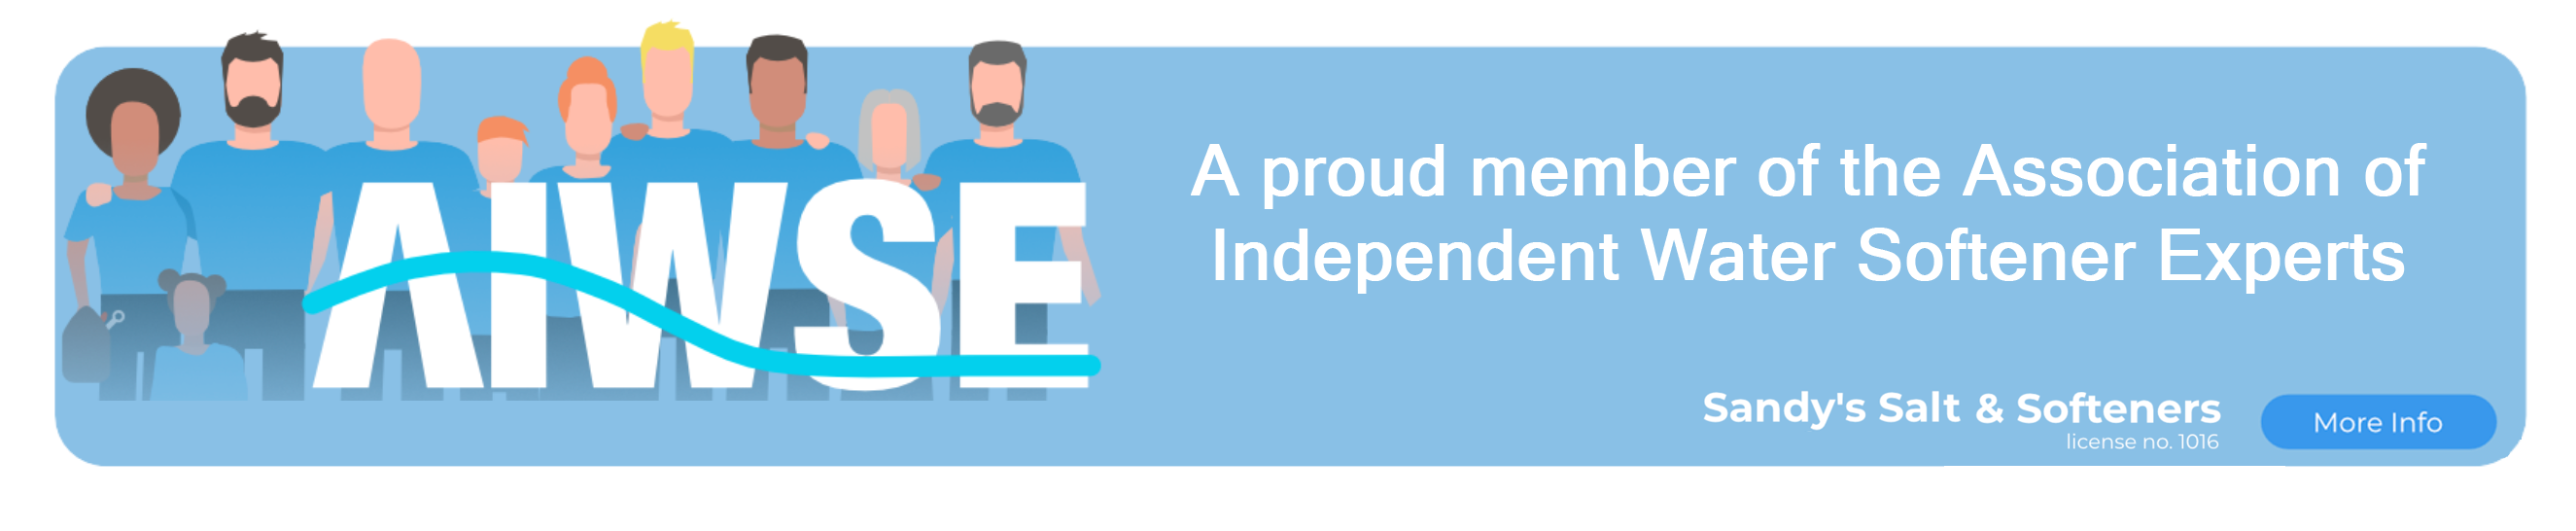 Sandy's Salt & Softeners is a proud member of the association of the Independent Water Softener Experts